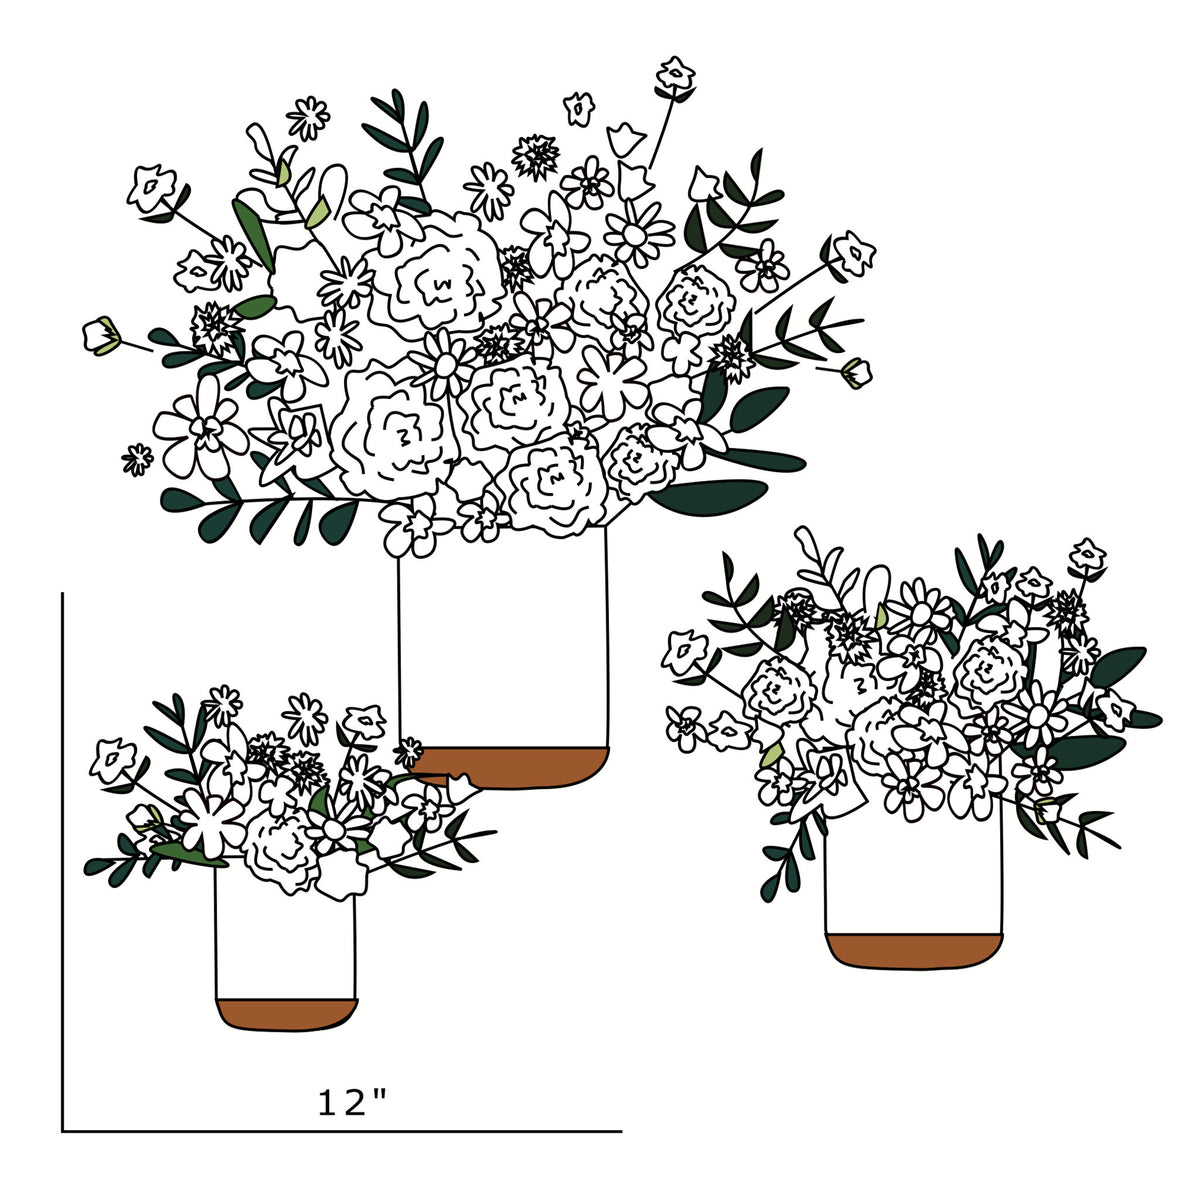 straw flowers growing clipart